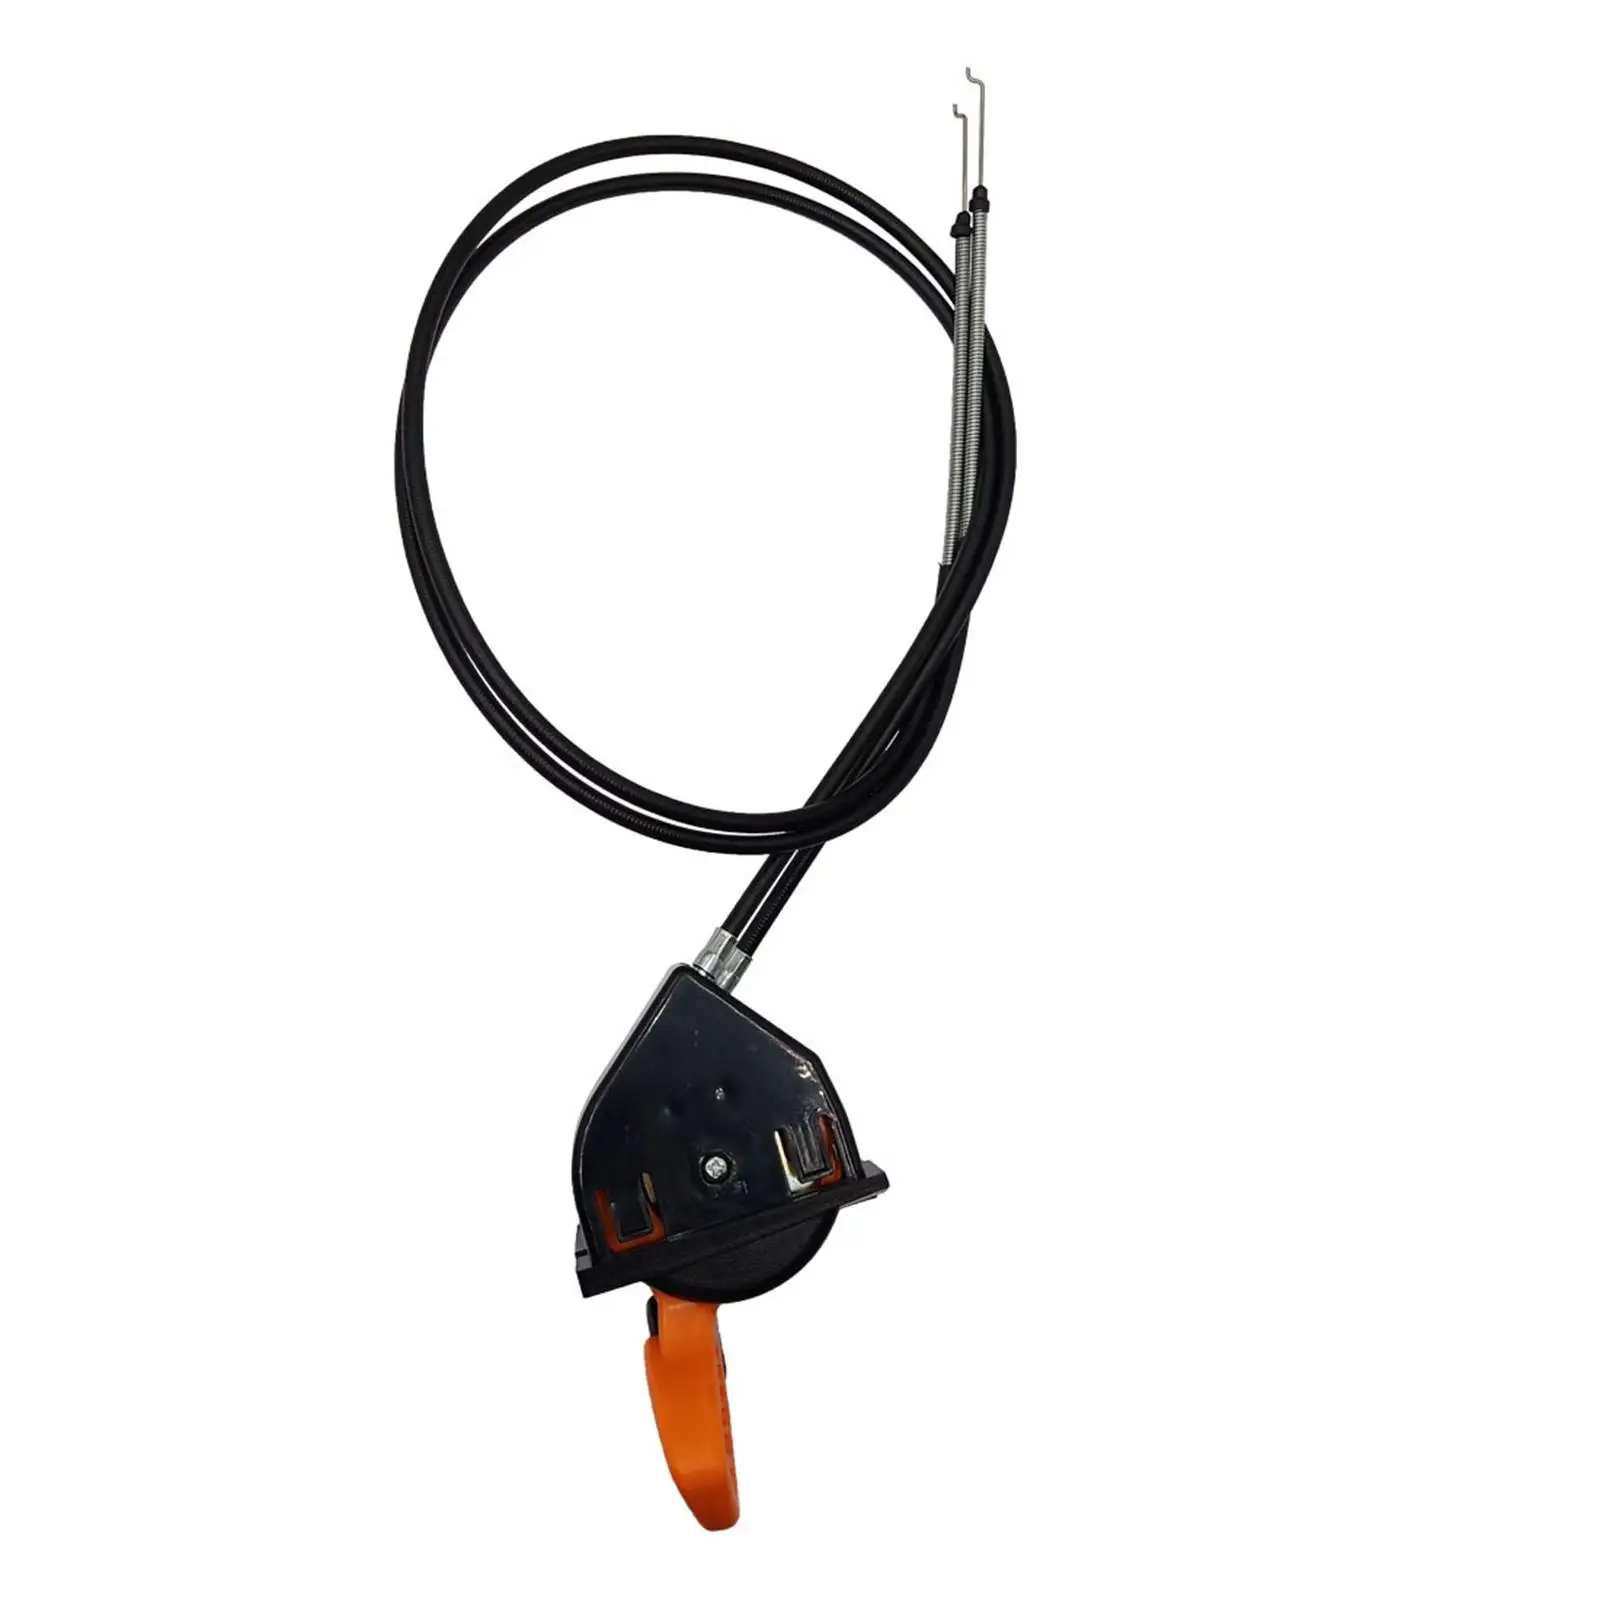 AM140333 Replace Equipment Accelerator Throttle Choke Lever Cable for JD Model X304 X310 X340 X360 X380 X534 X570 X580